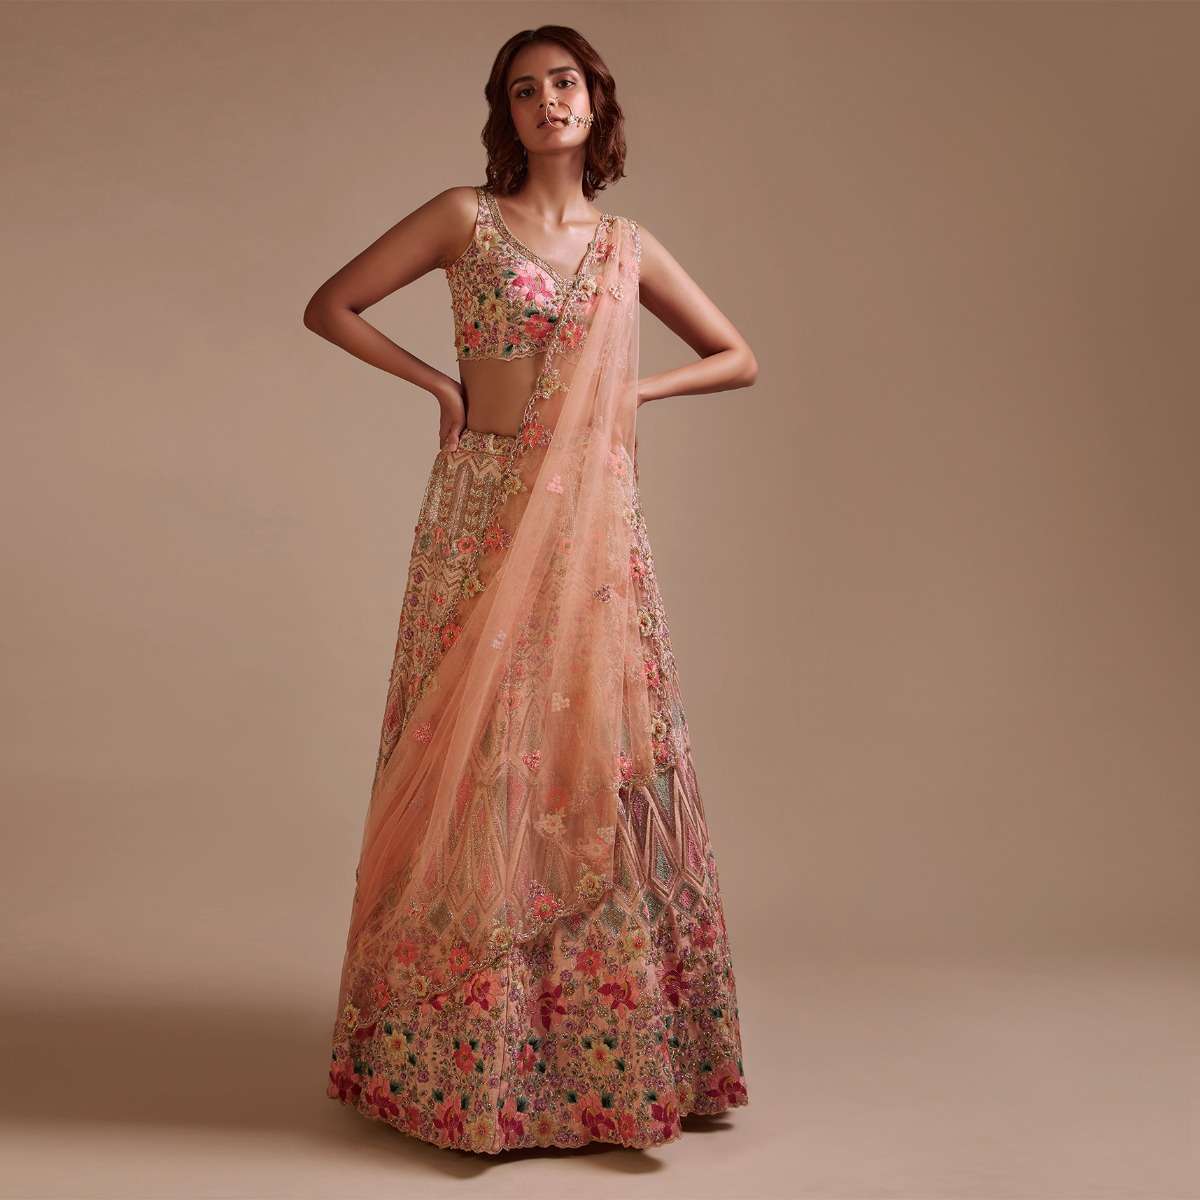 Powder Pink Lehenga Choli In Raw Silk With Colorful Resham And Sequins Embroidered Geometric And Floral Motifs